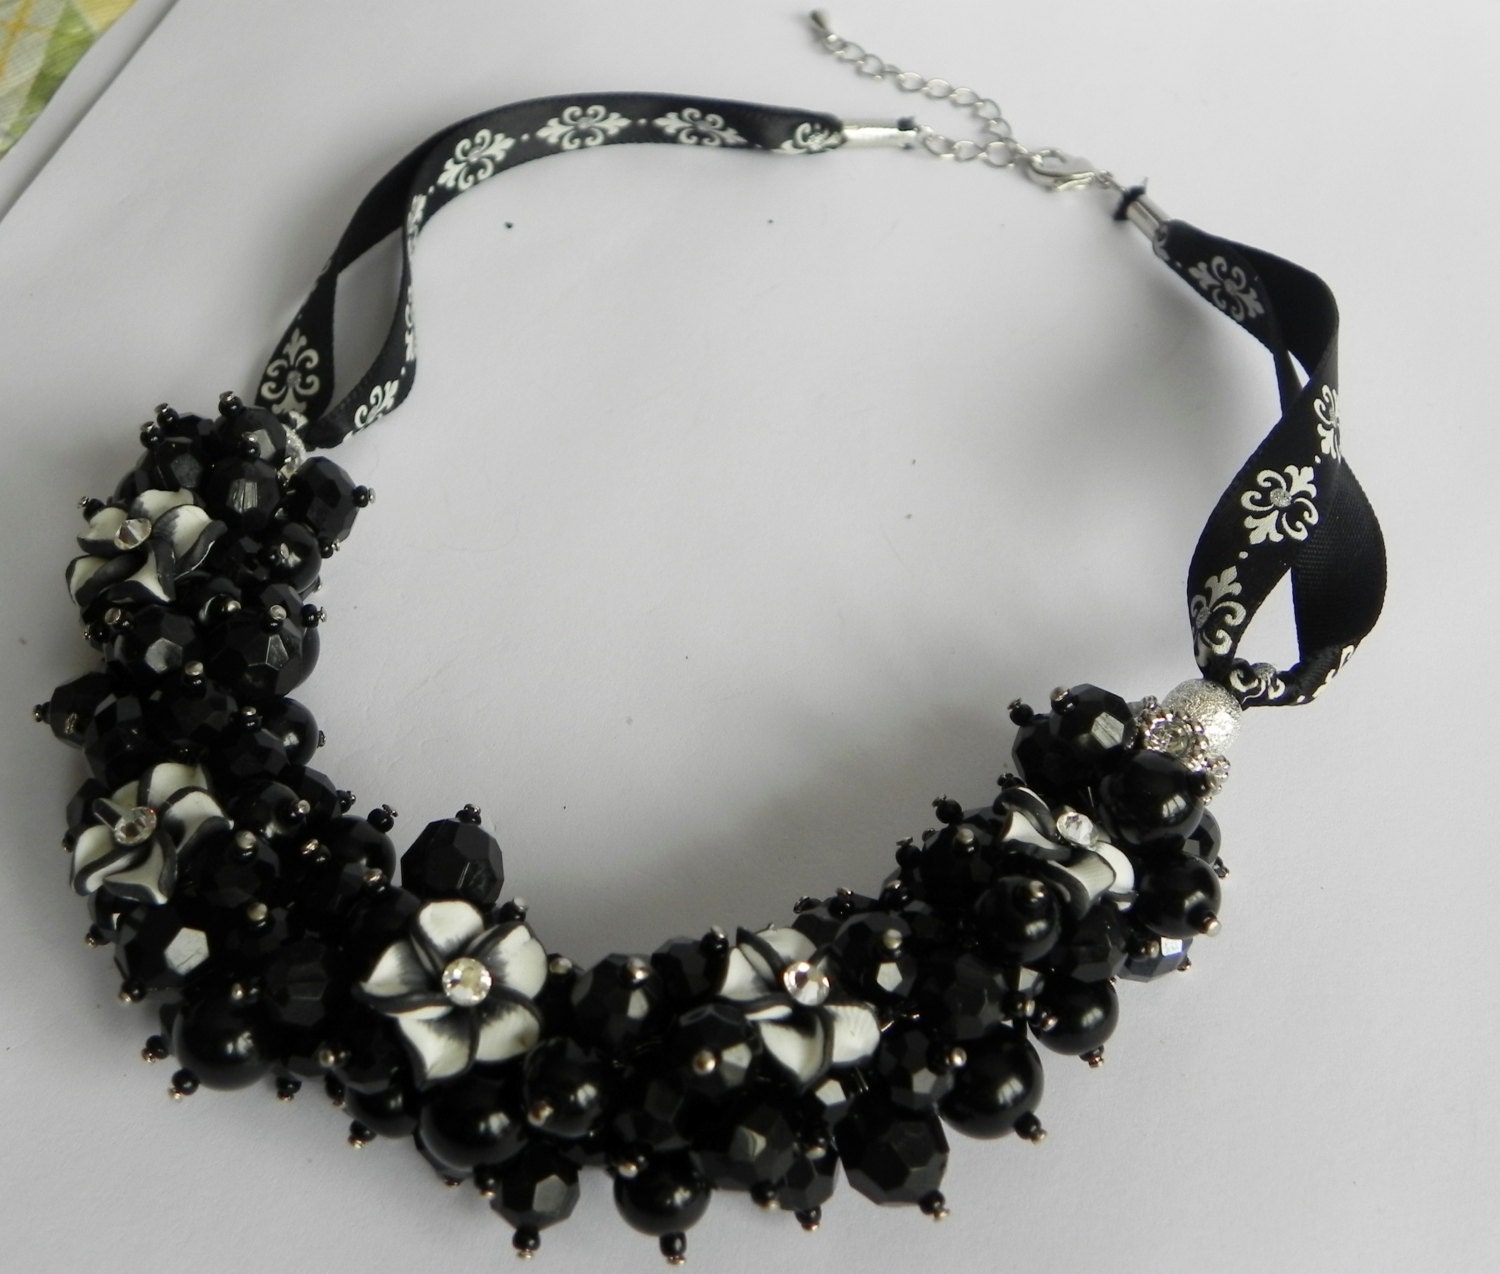 Black and White Ribbon Flower Beaded Necklace With Earrings -Rhinestone Flowers, Cluster Necklace, Handmade, Bridal, Wedding Jewelry, Custom